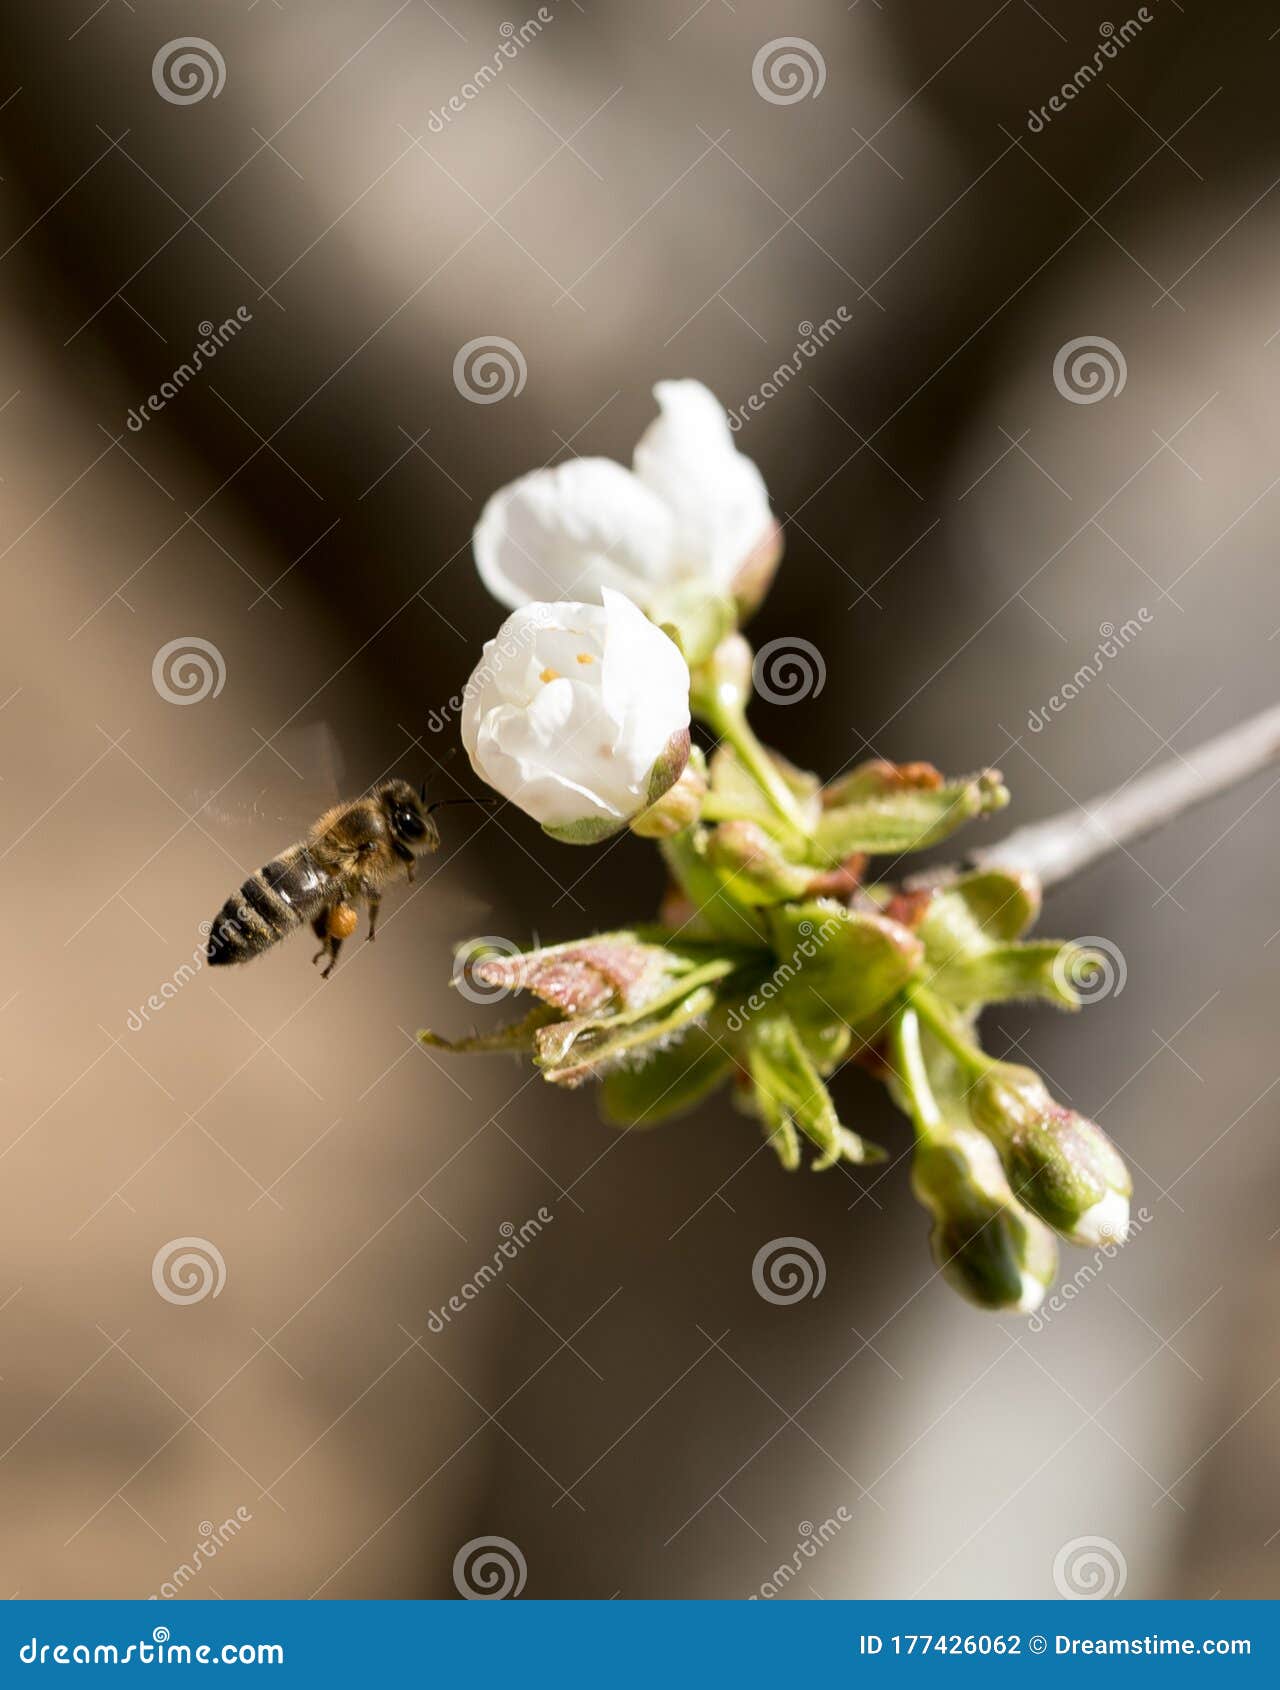 bee flying to collect polen.